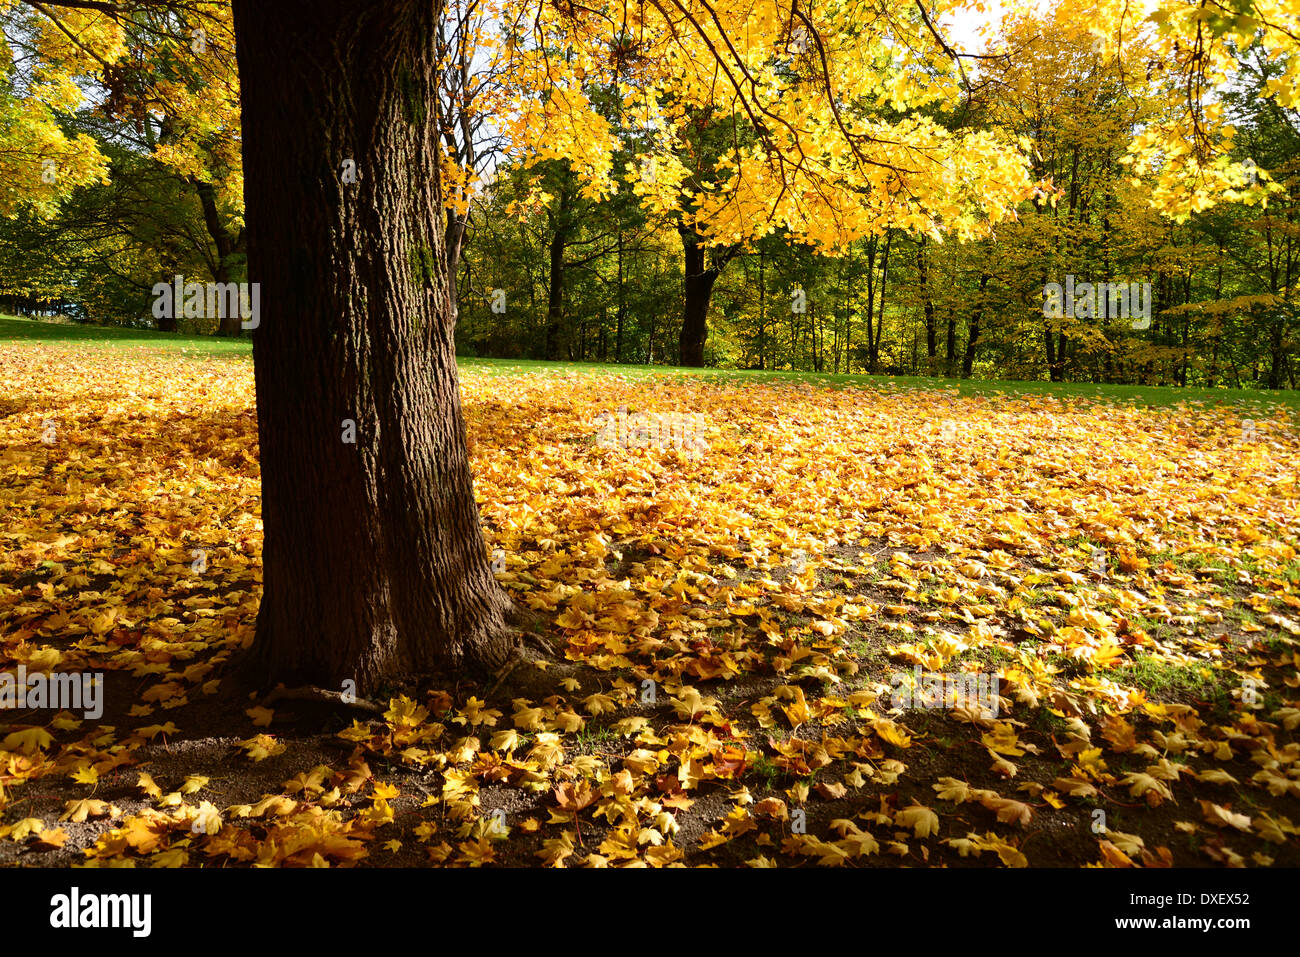 The Park in Oslo, Norway during Autumn. Stock Photo